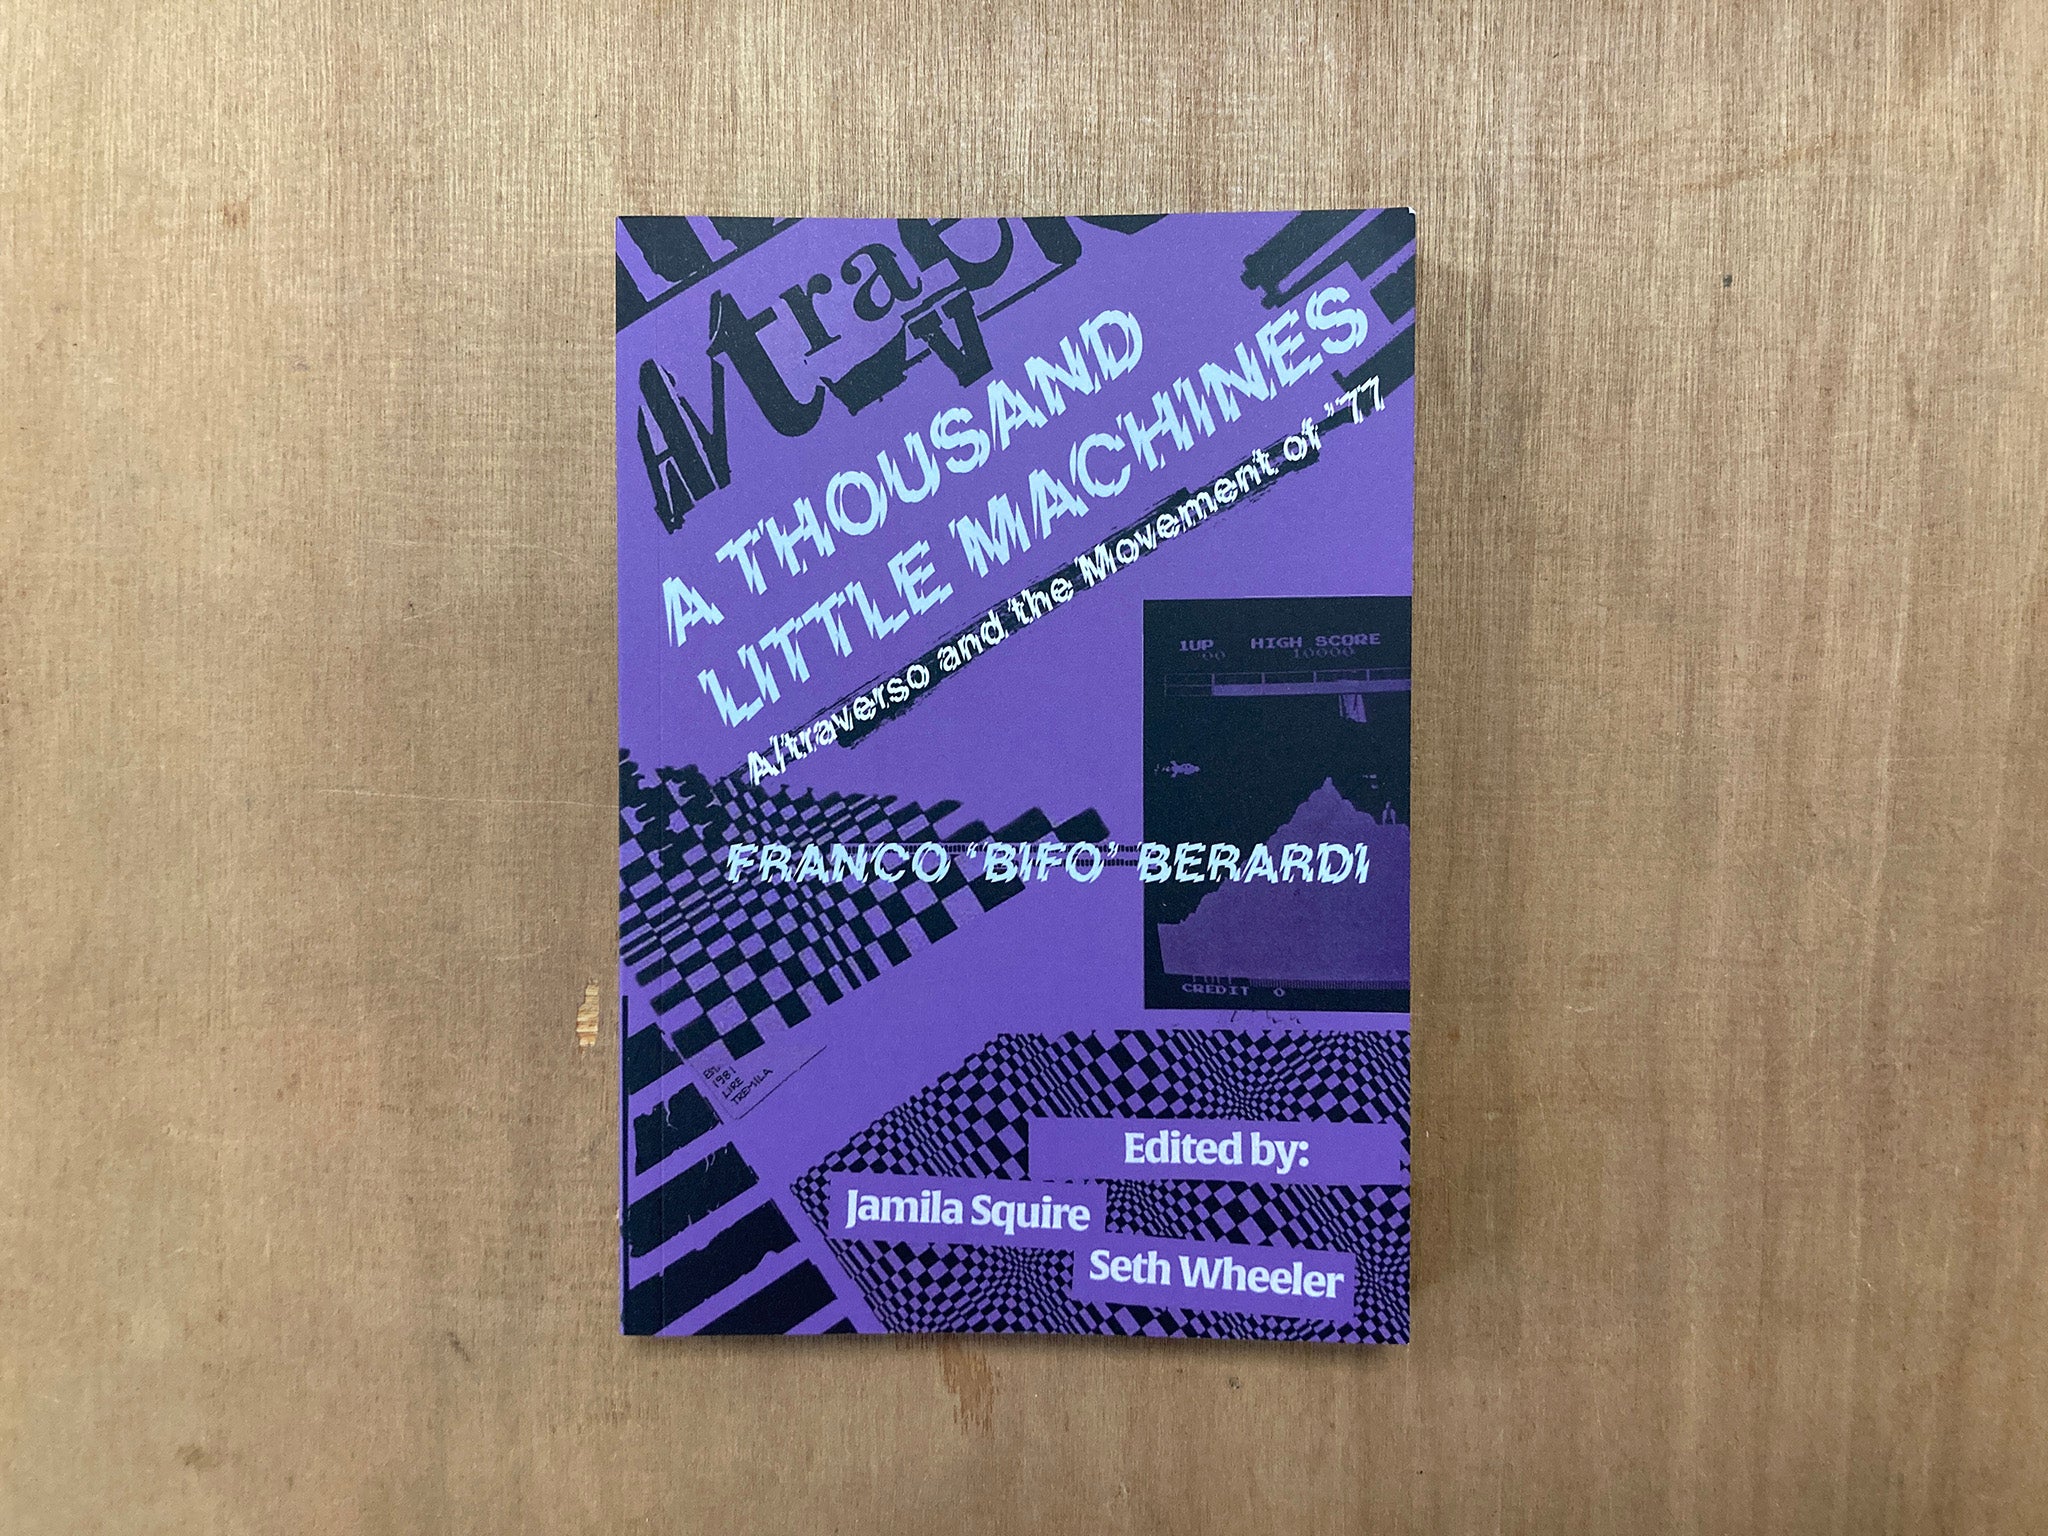 FRANCO 'BIFO' BERARDI: 'A THOUSAND LITTLE MACHINES: A/TRAVERSO AND THE MOVEMENT OF '77' edited by Jamila Squire and Seth Wheeler